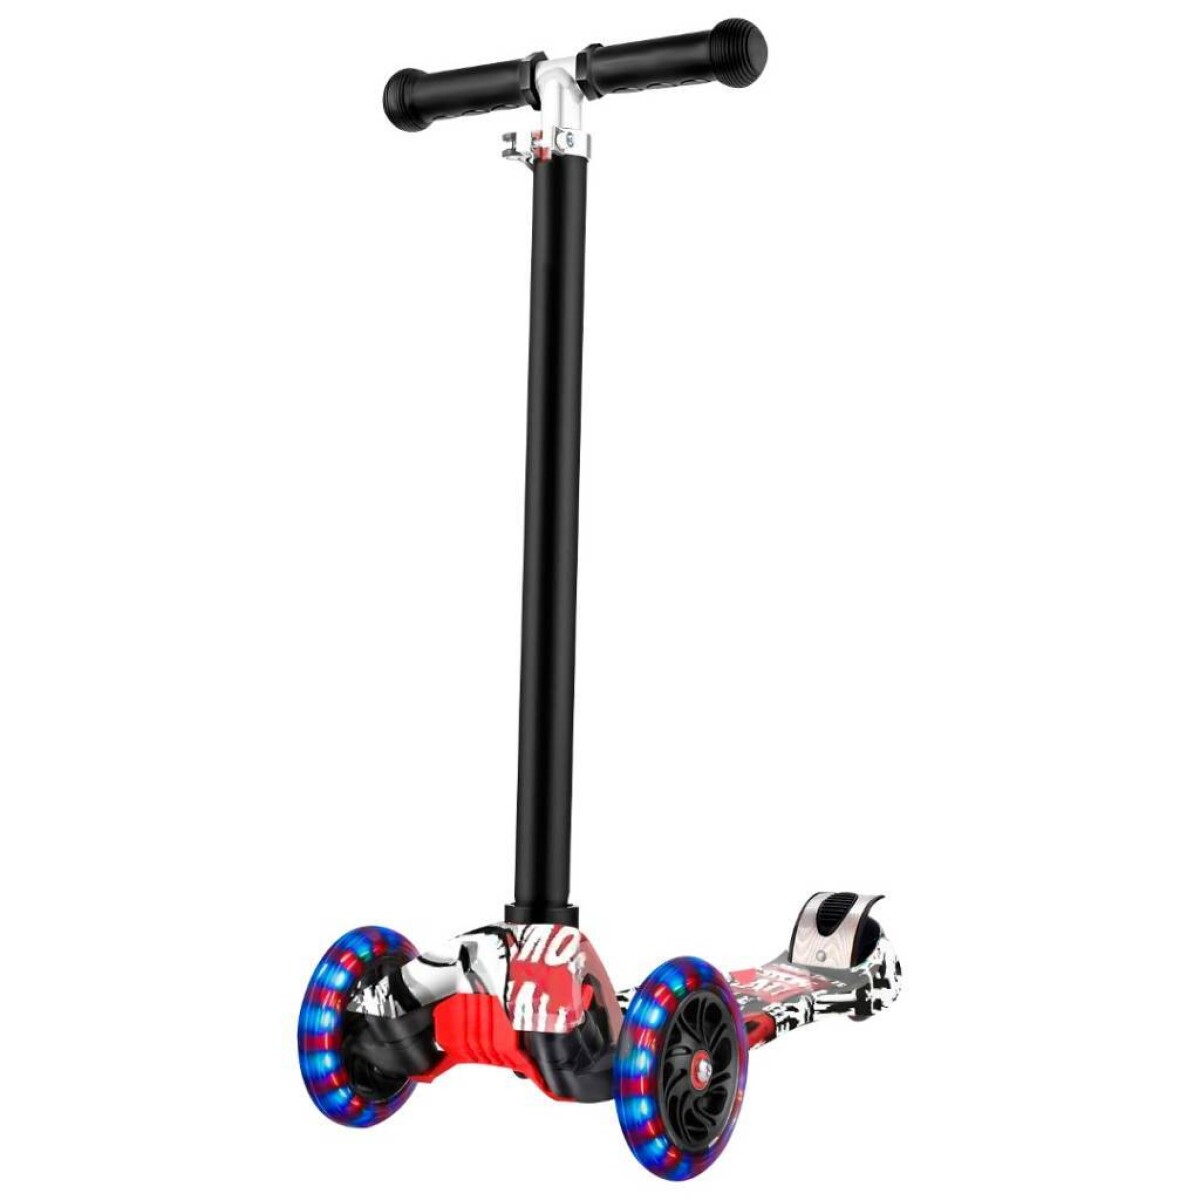 Tripatín Scooter Con Luces Led - negro 